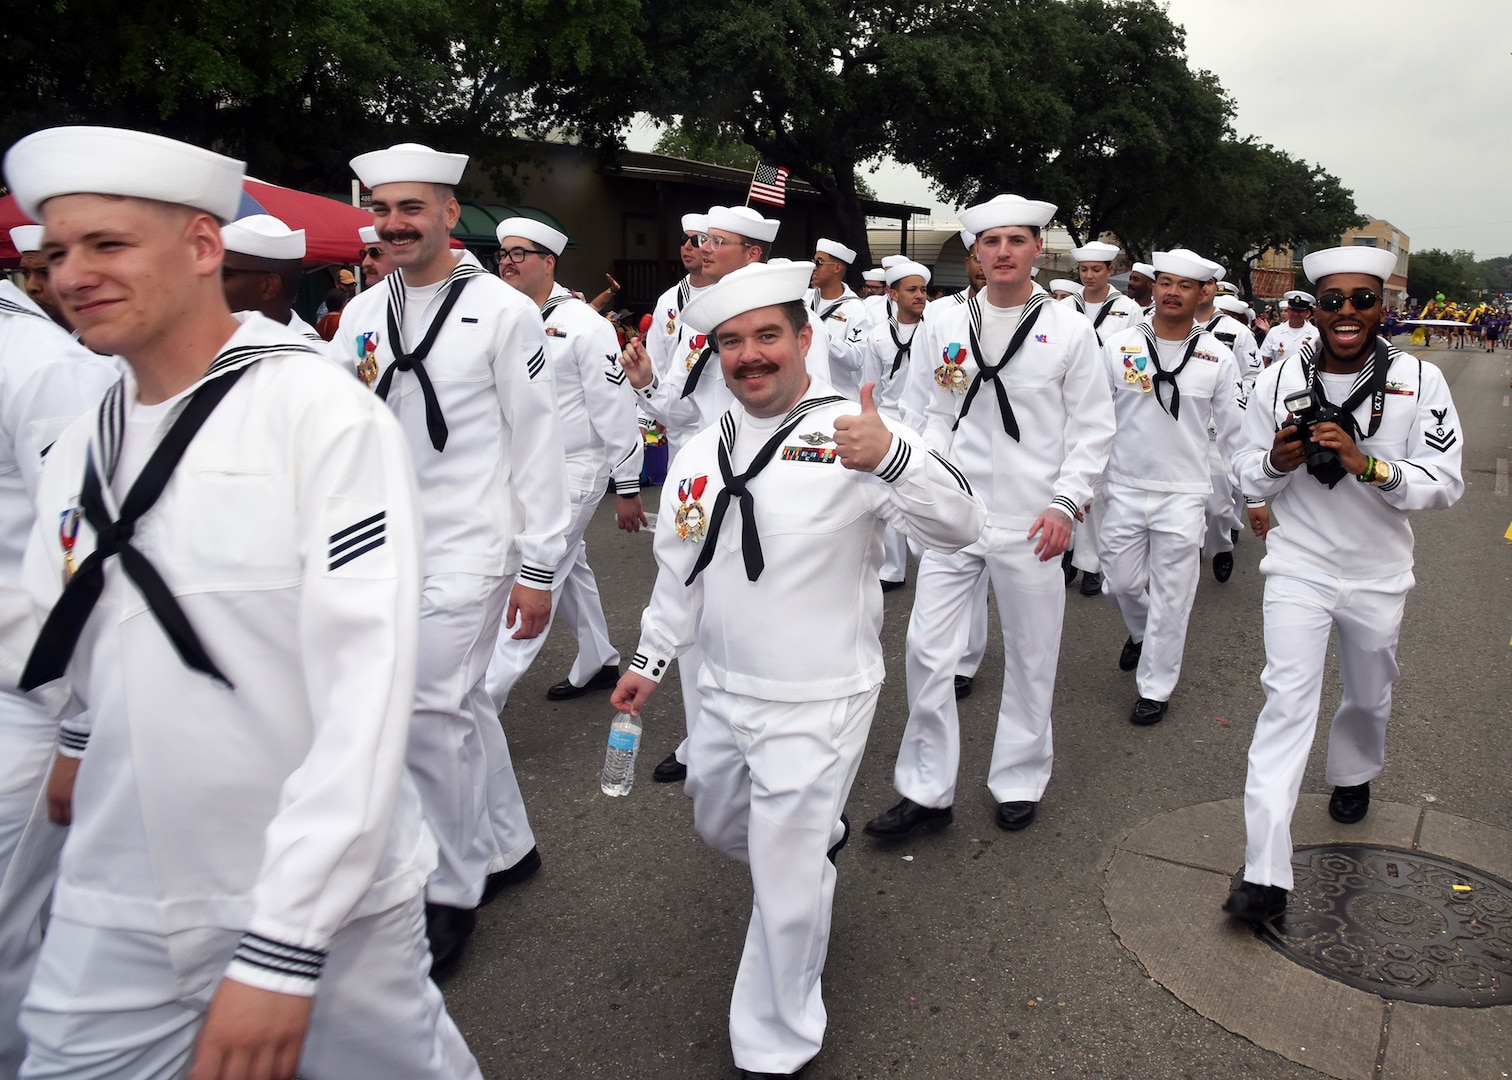 SAN ANTONIO - (April 26, 2024) – More than 100 Sailors within Joint Base San Antonio (JBSA) took part in the Battle of Flowers Parade held during Fiesta San Antonio. The Battle of Flowers Parade is the oldest event and largest parade of Fiesta San Antonio attracting crowds of more than 350,000. Leading the Sailors in the parade was Rear Adm. Walter Brafford, commander, Naval Medical Forces Support Command (NMFSC). Other commands participating included but not limited to Naval Medical Research Unit (NAMRU) San Antonio, Navy Talent Acquisition Group (NTAG) San Antonio, Navy Medicine Training Support Center (NMTSC), and Navy Wounded Warrior (NWW) Program, Navy Reserve Center (NRC) San Antonio, and USS San Antonio (LPD 17). Joint Base San Antonio is proud to be part of the diverse and vibrant community of San Antonio also known as Military City USA. (U.S. Navy Photo by Burrell Parmer, Naval Medical Research Unit San Antonio Public Affairs/Released)